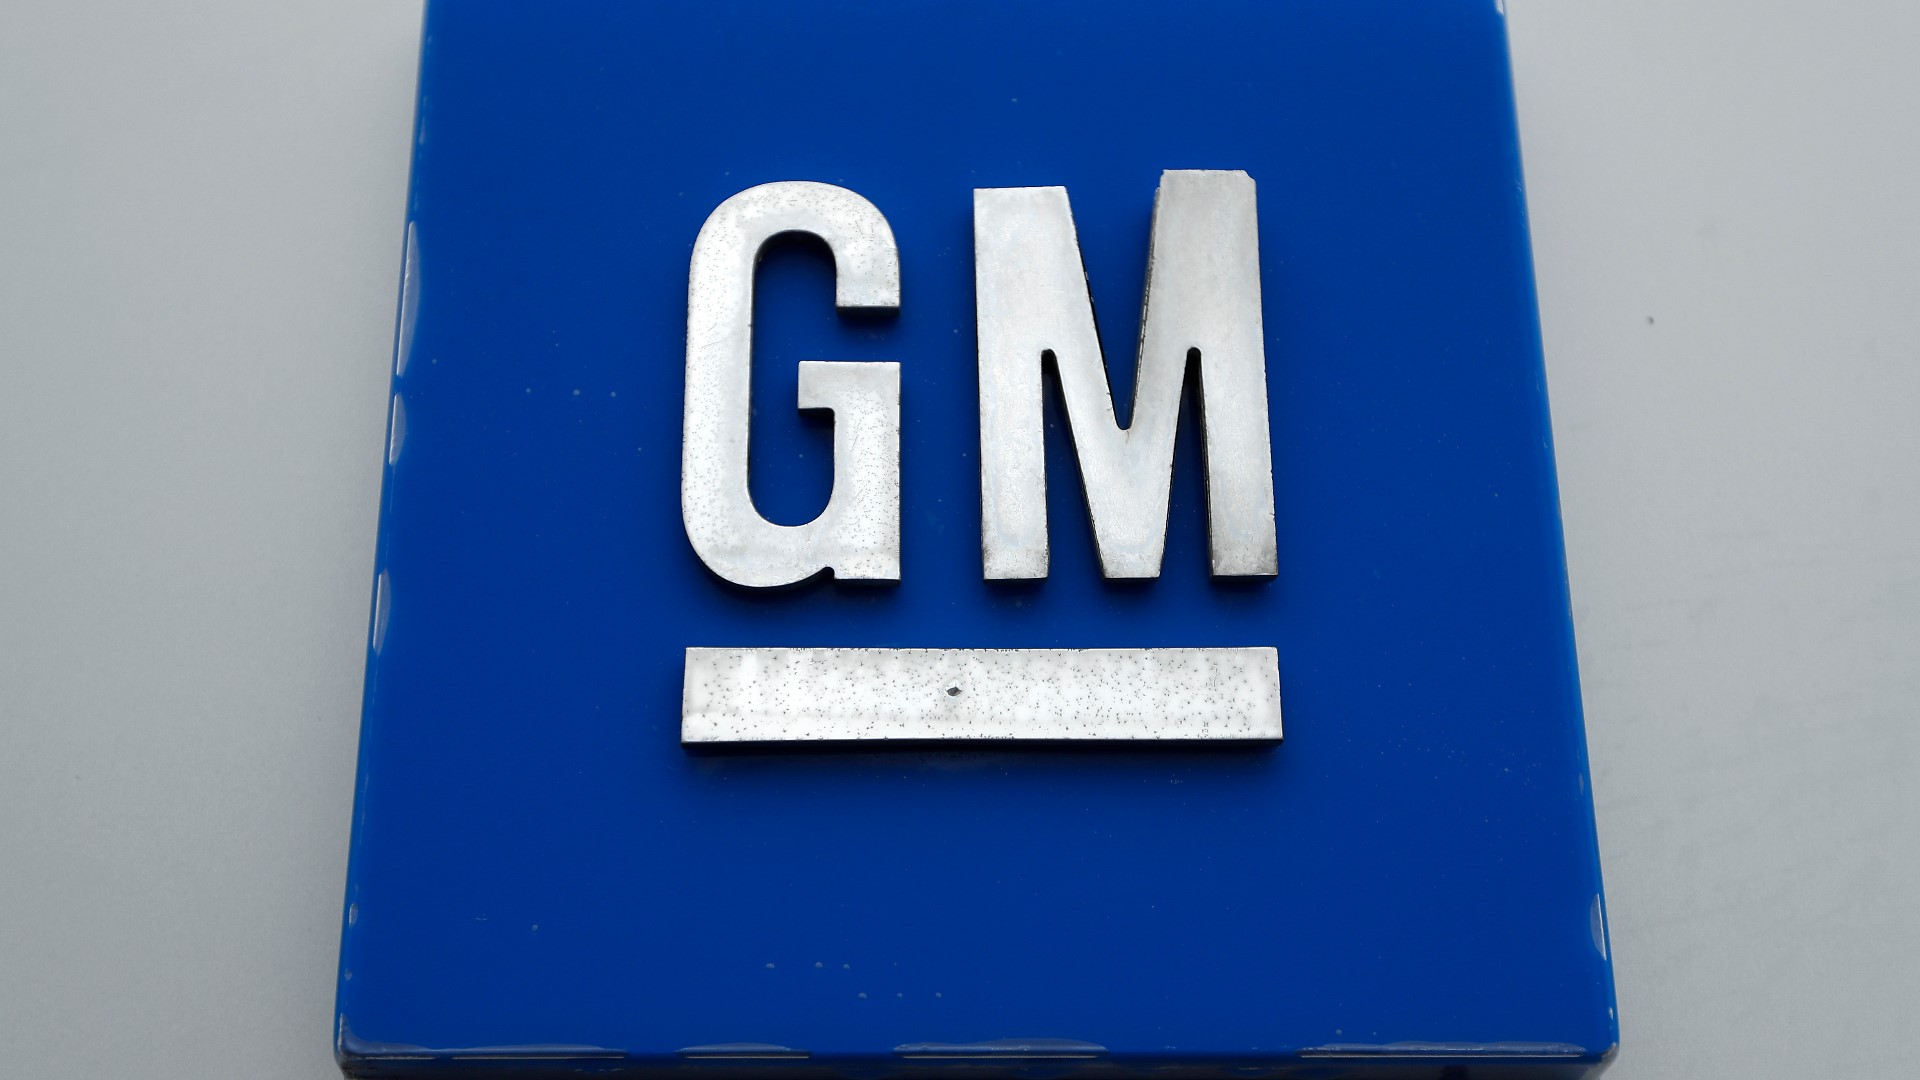 General Motors had petitioned four times starting in 2016 to avoid a recall, contending the Takata air bag inflators are safe.